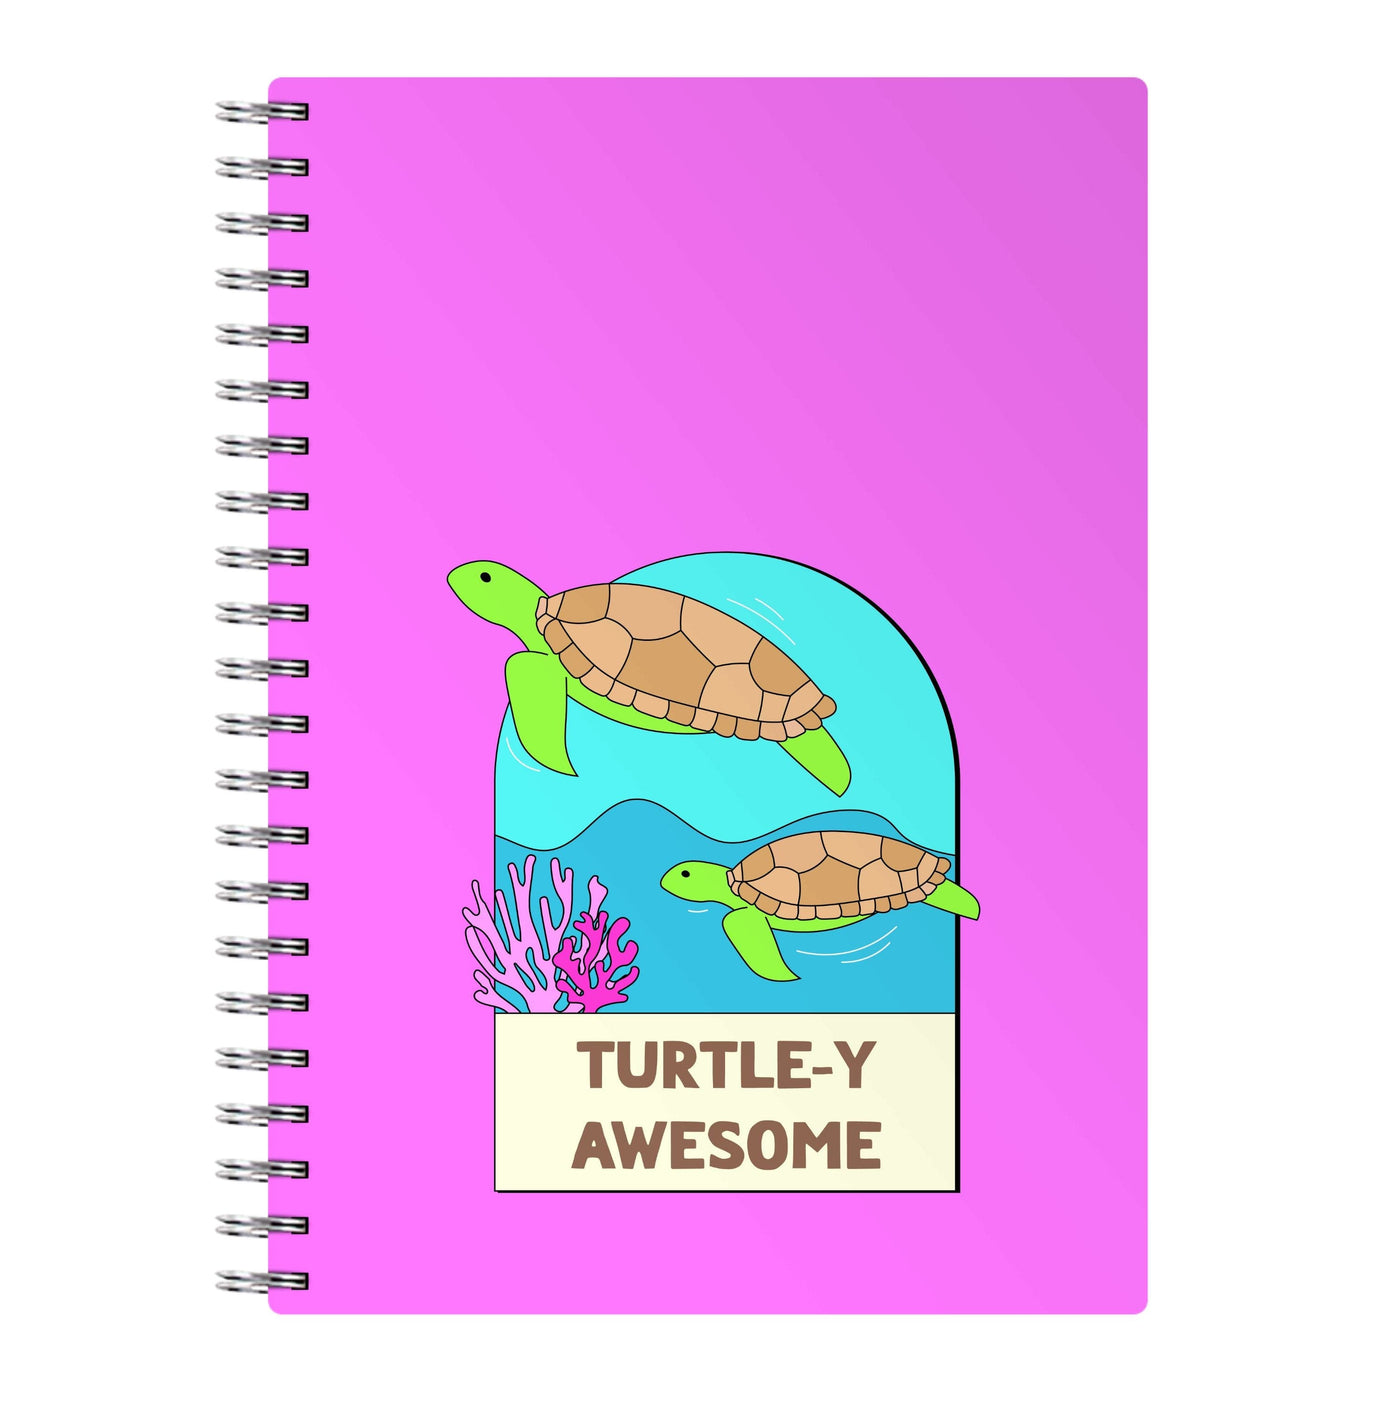 Turtle-y Awesome - Sealife Notebook